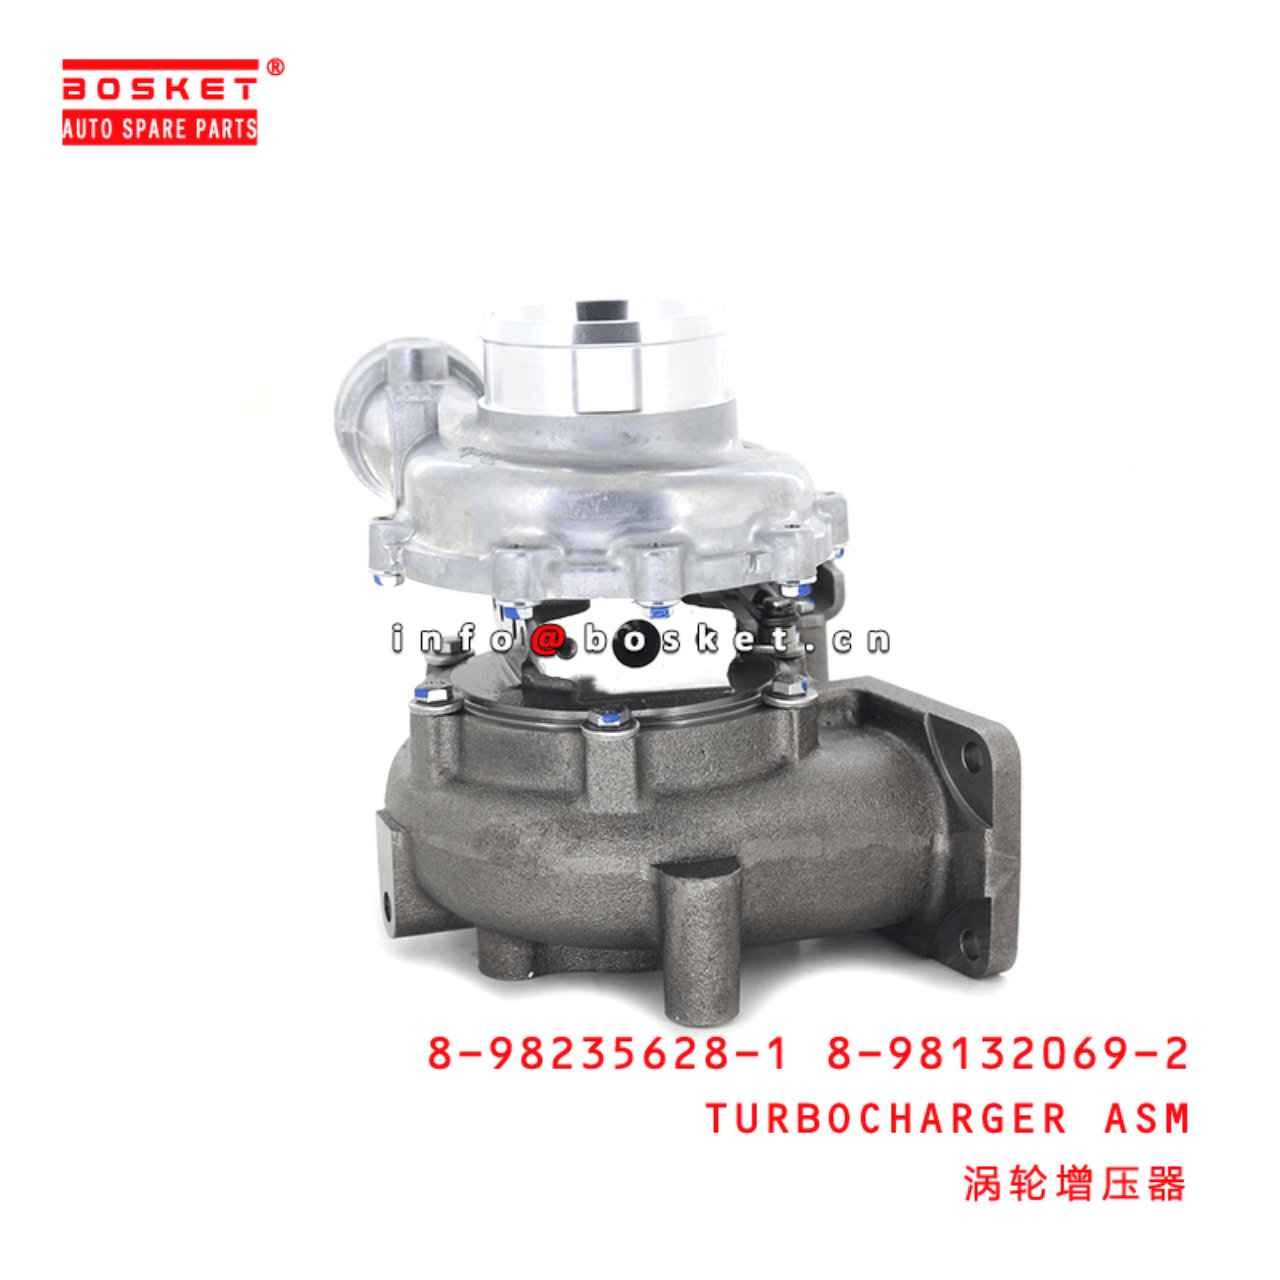 8-98235628-1 8-98132069-2 Turbocharger Assembly 8982356281 8981320692 Suitable for ISUZU D-MAX